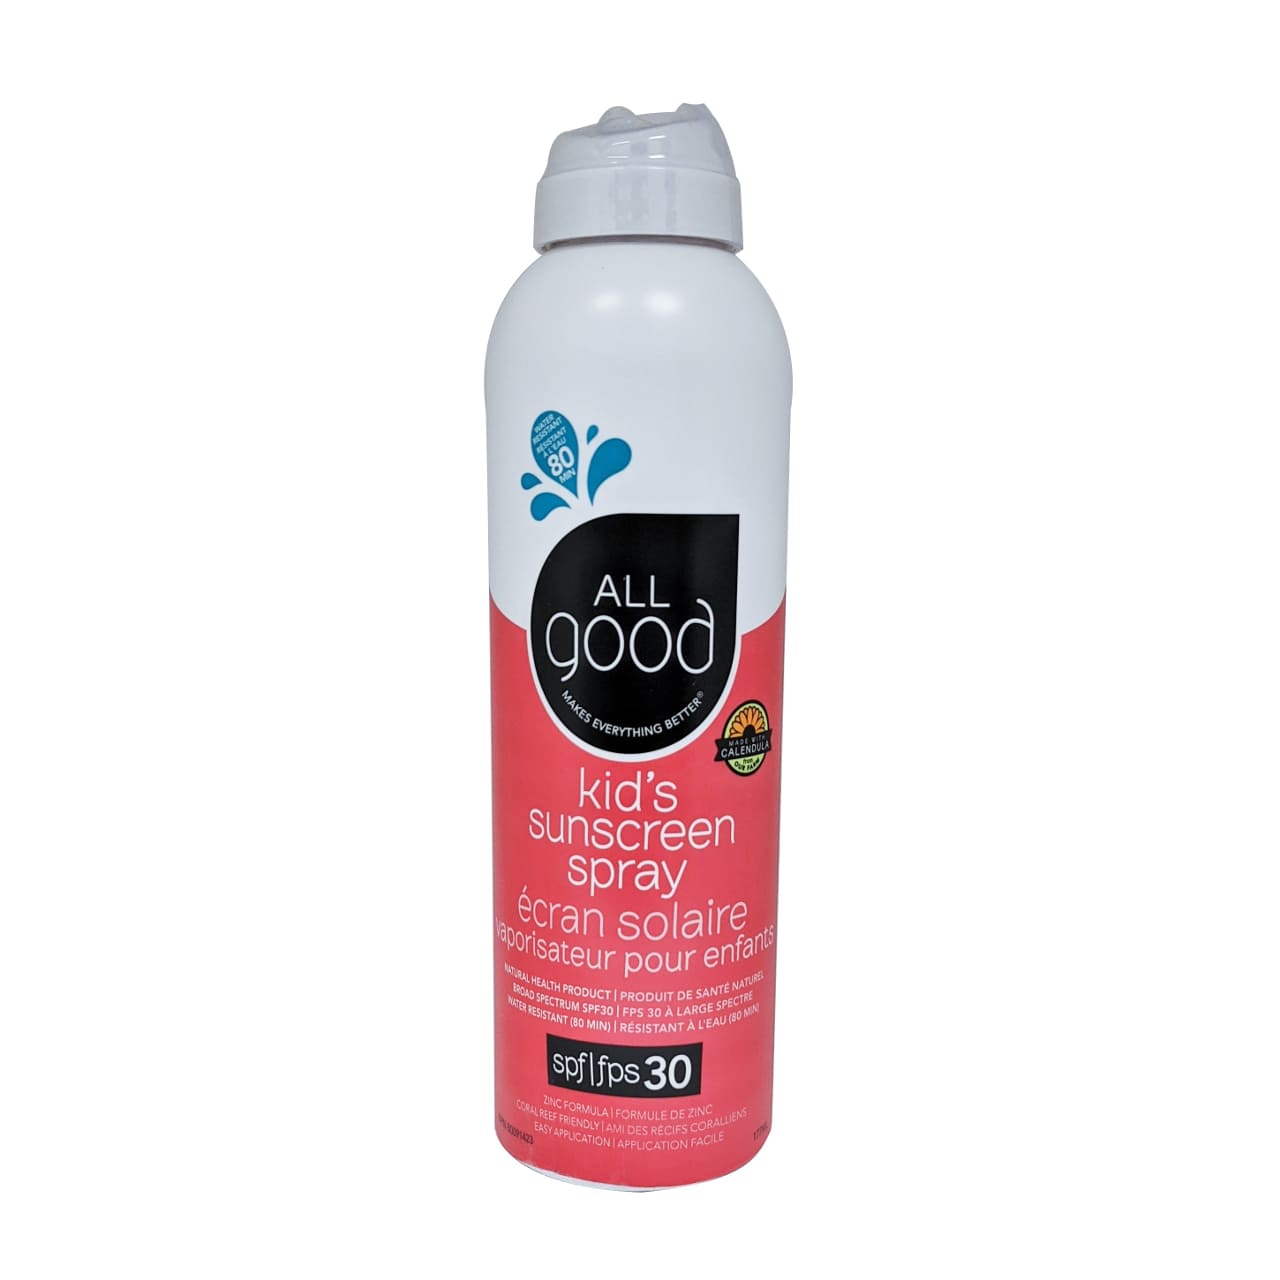 Product package for All Good Sunscreen Spray for Kids SPF30